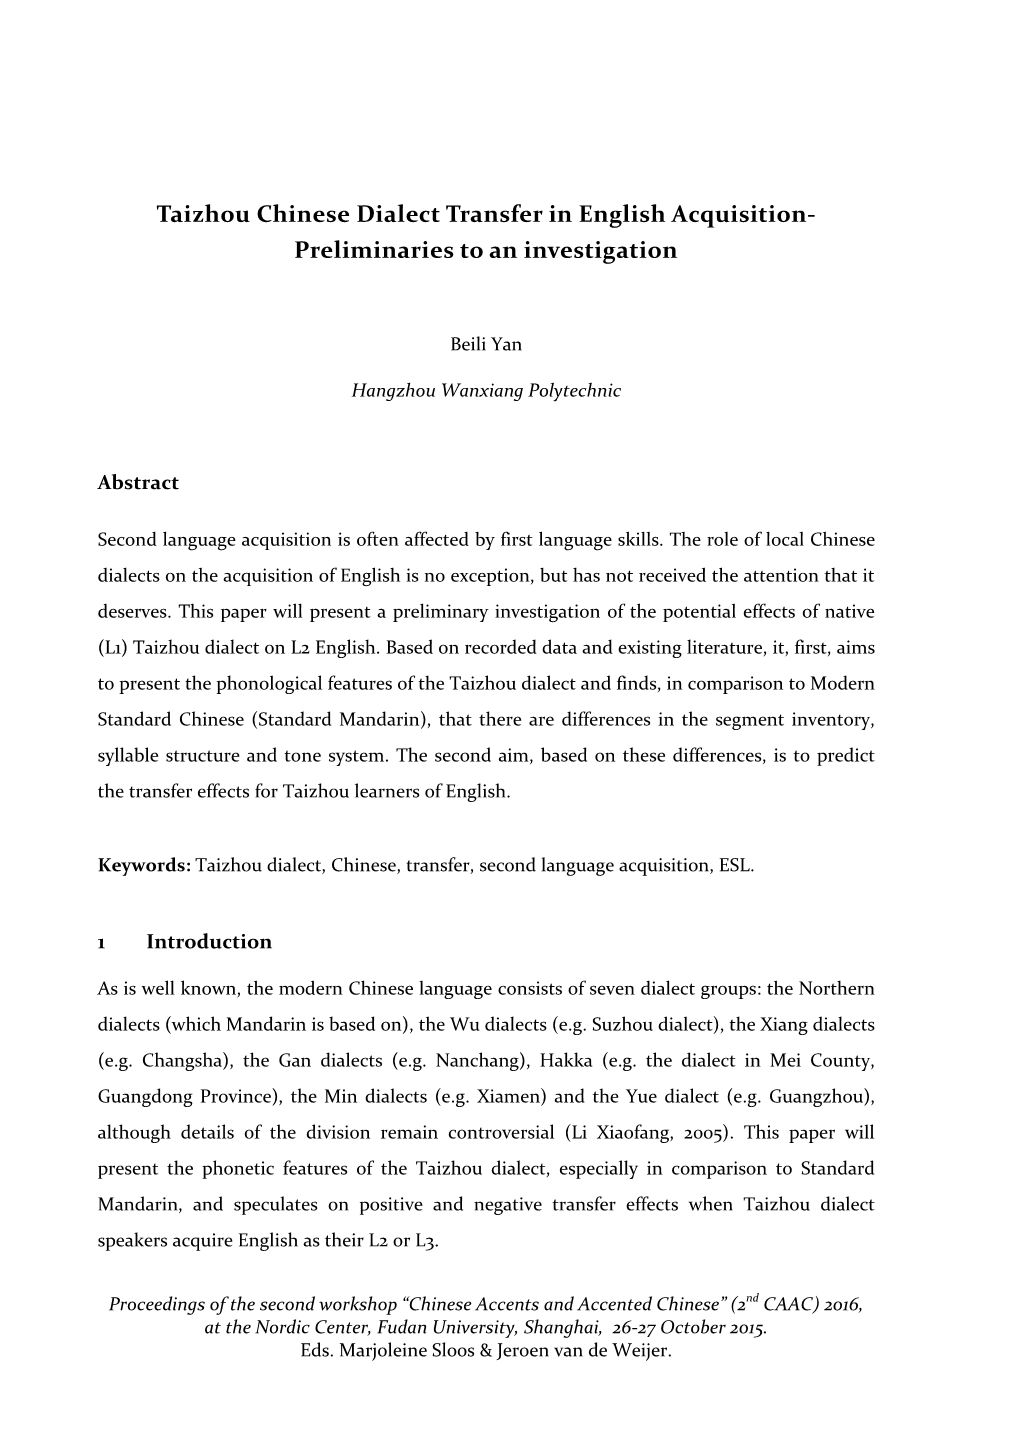 Taizhou Chinese Dialect Transfer in English Acquisition- Preliminaries to an Investigation